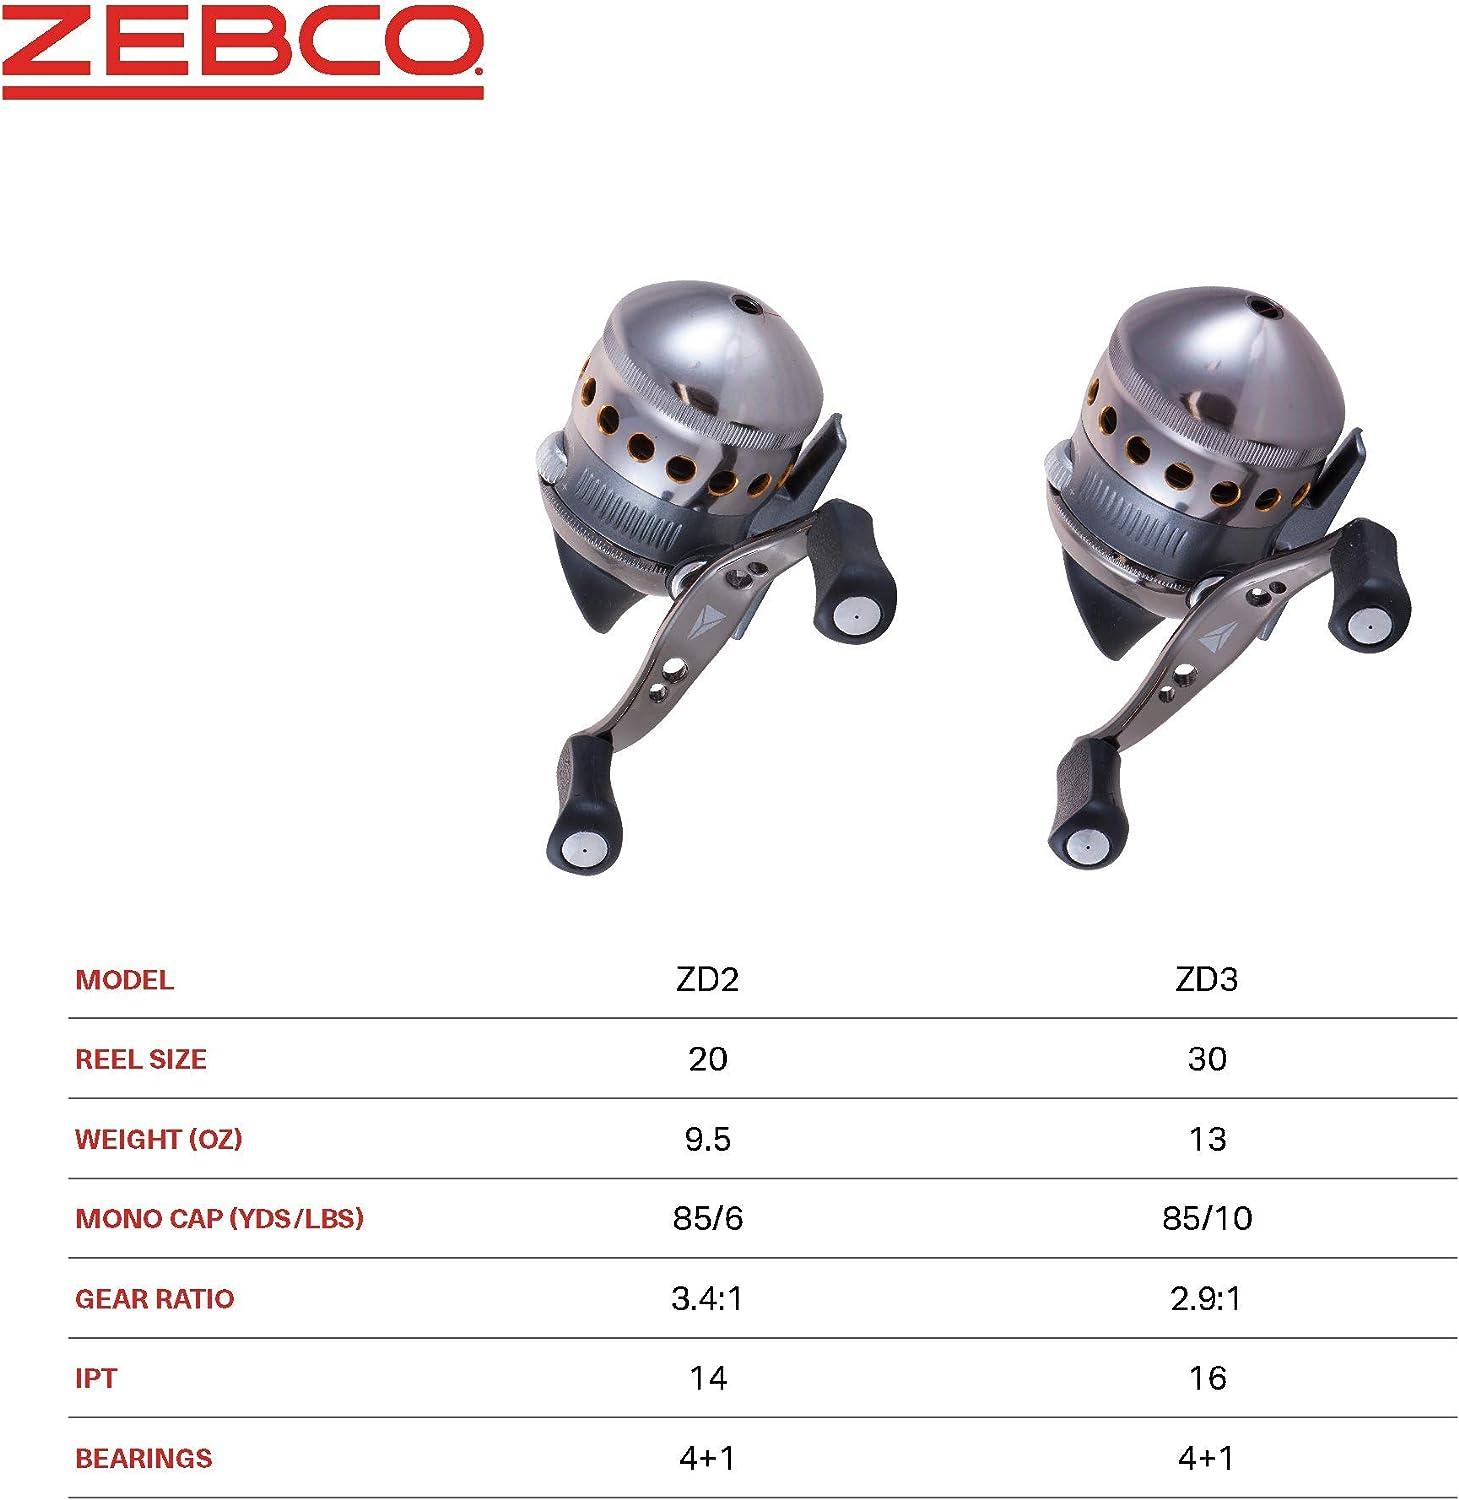 Zebco Delta Spincast Fishing Reel, Instant Anti-Reverse Clutch, All-Metal  Gears, Changeable Right- or Left-Hand Retrieve Size 30 Reel (2008)